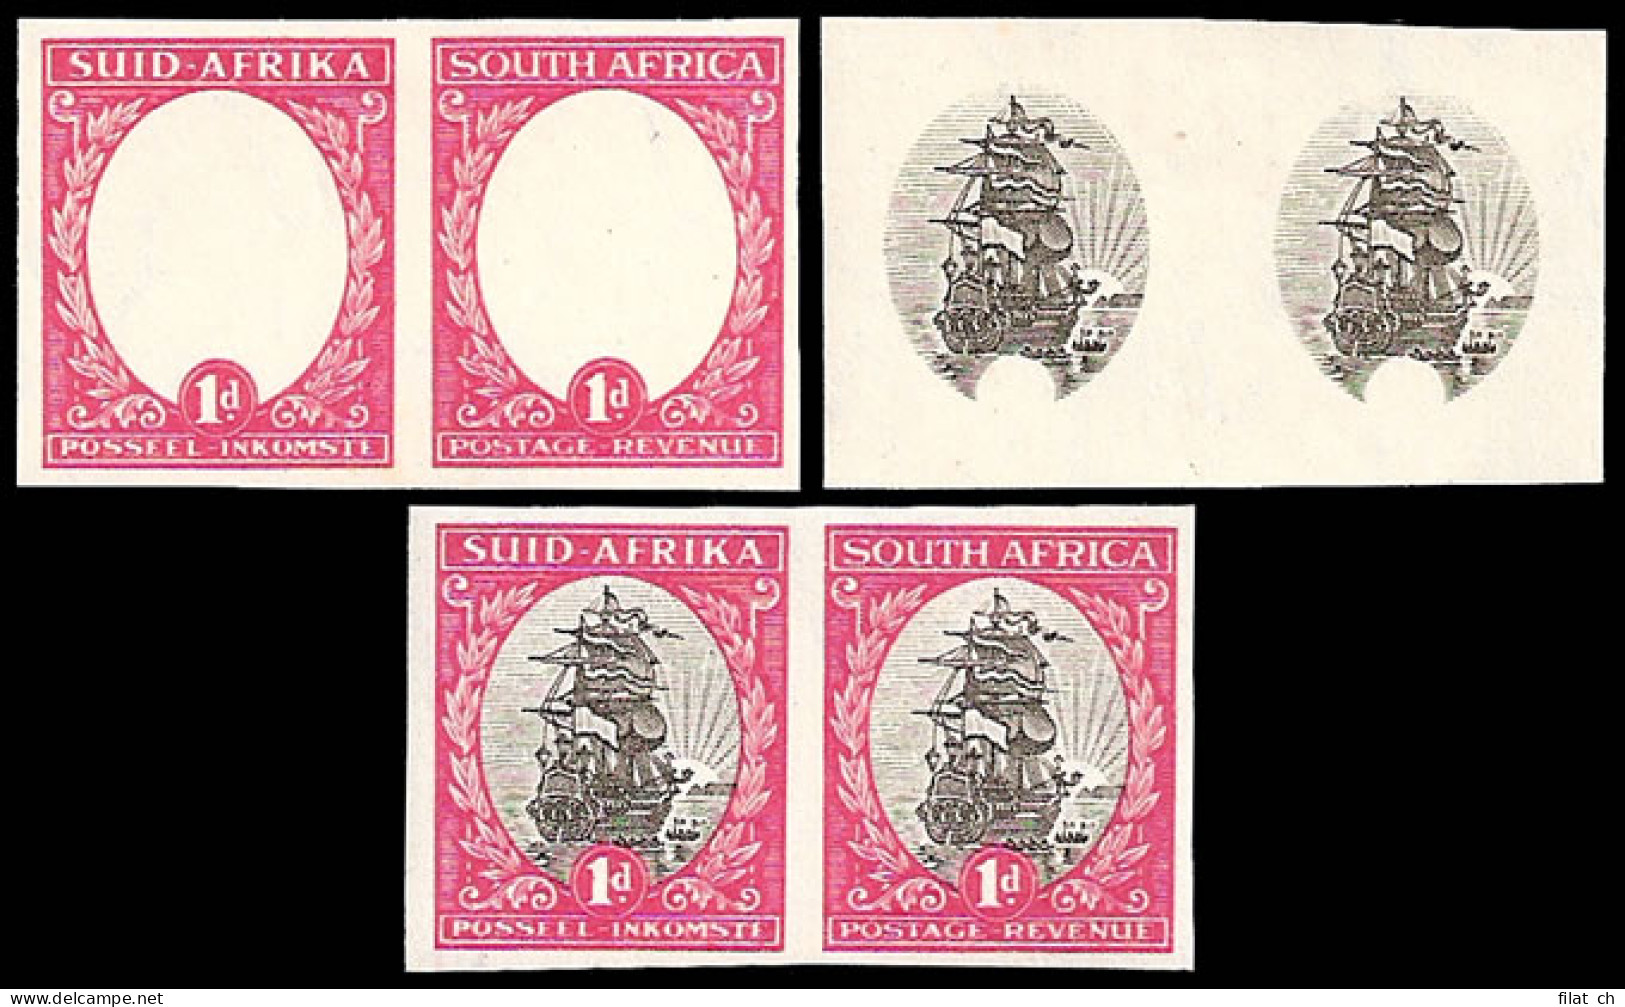 South Africa 1933 1d PO Museum "Proofs" Rare Trio All Stages - Unclassified